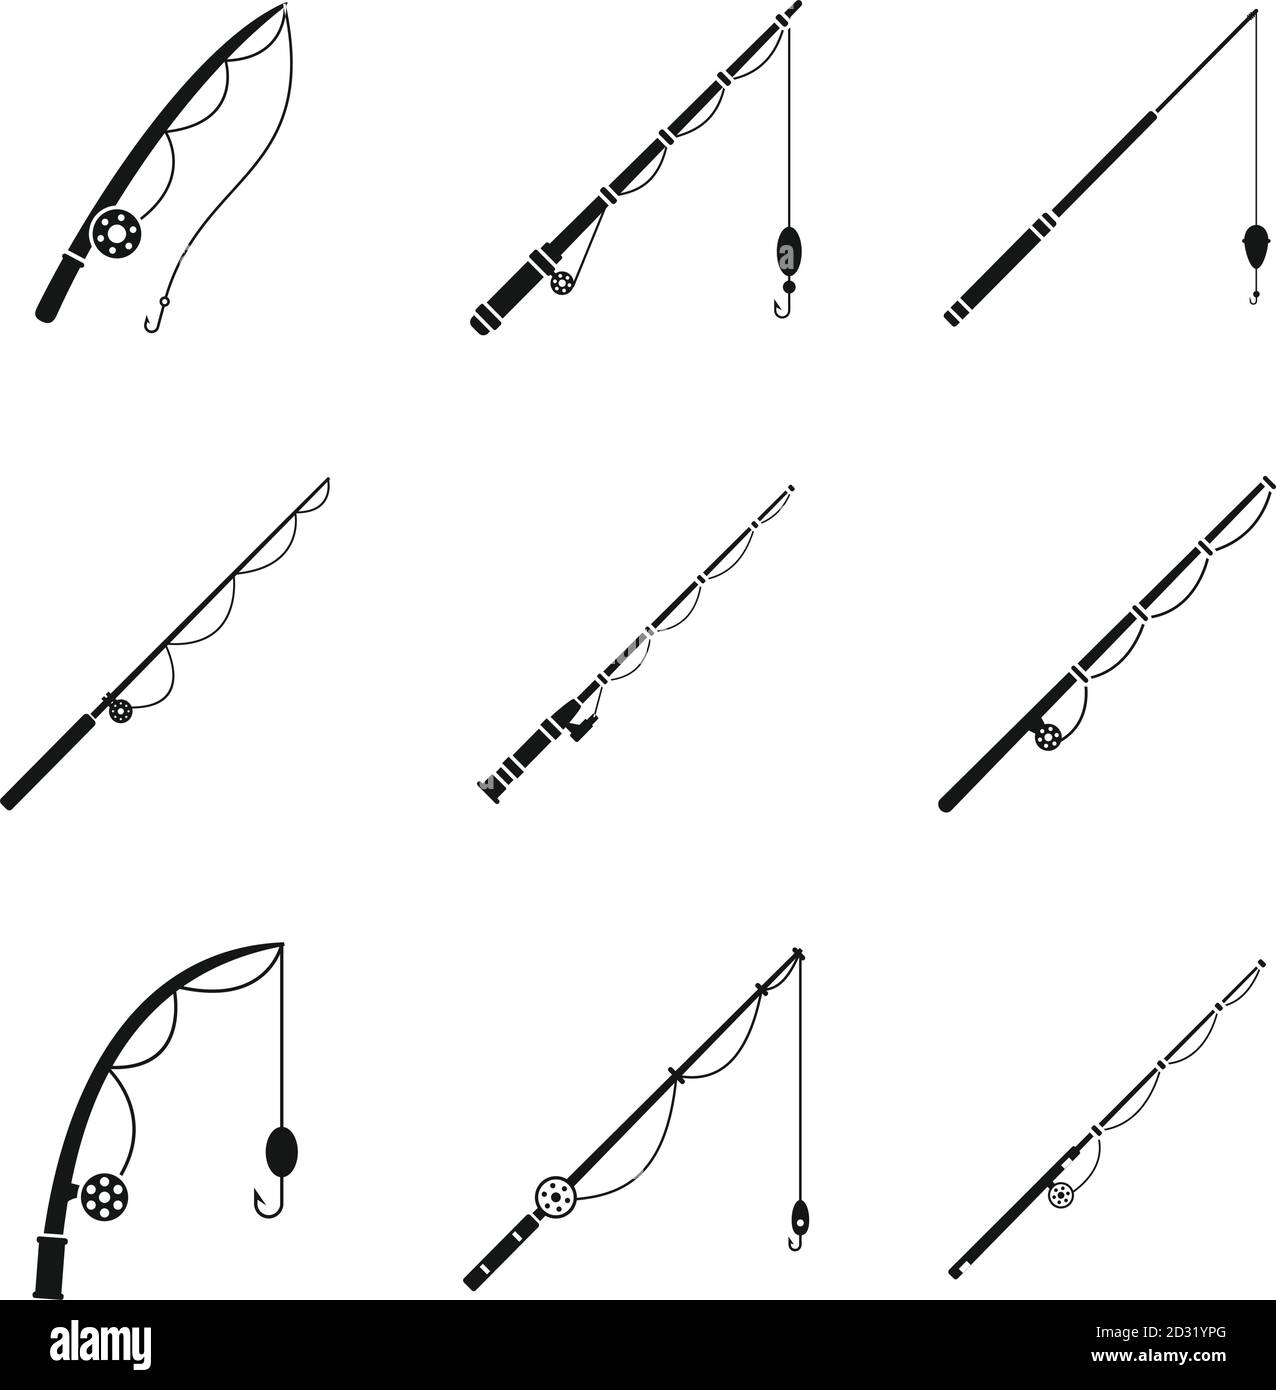 Fishing rod fishing pole Stock Vector Images - Page 3 - Alamy